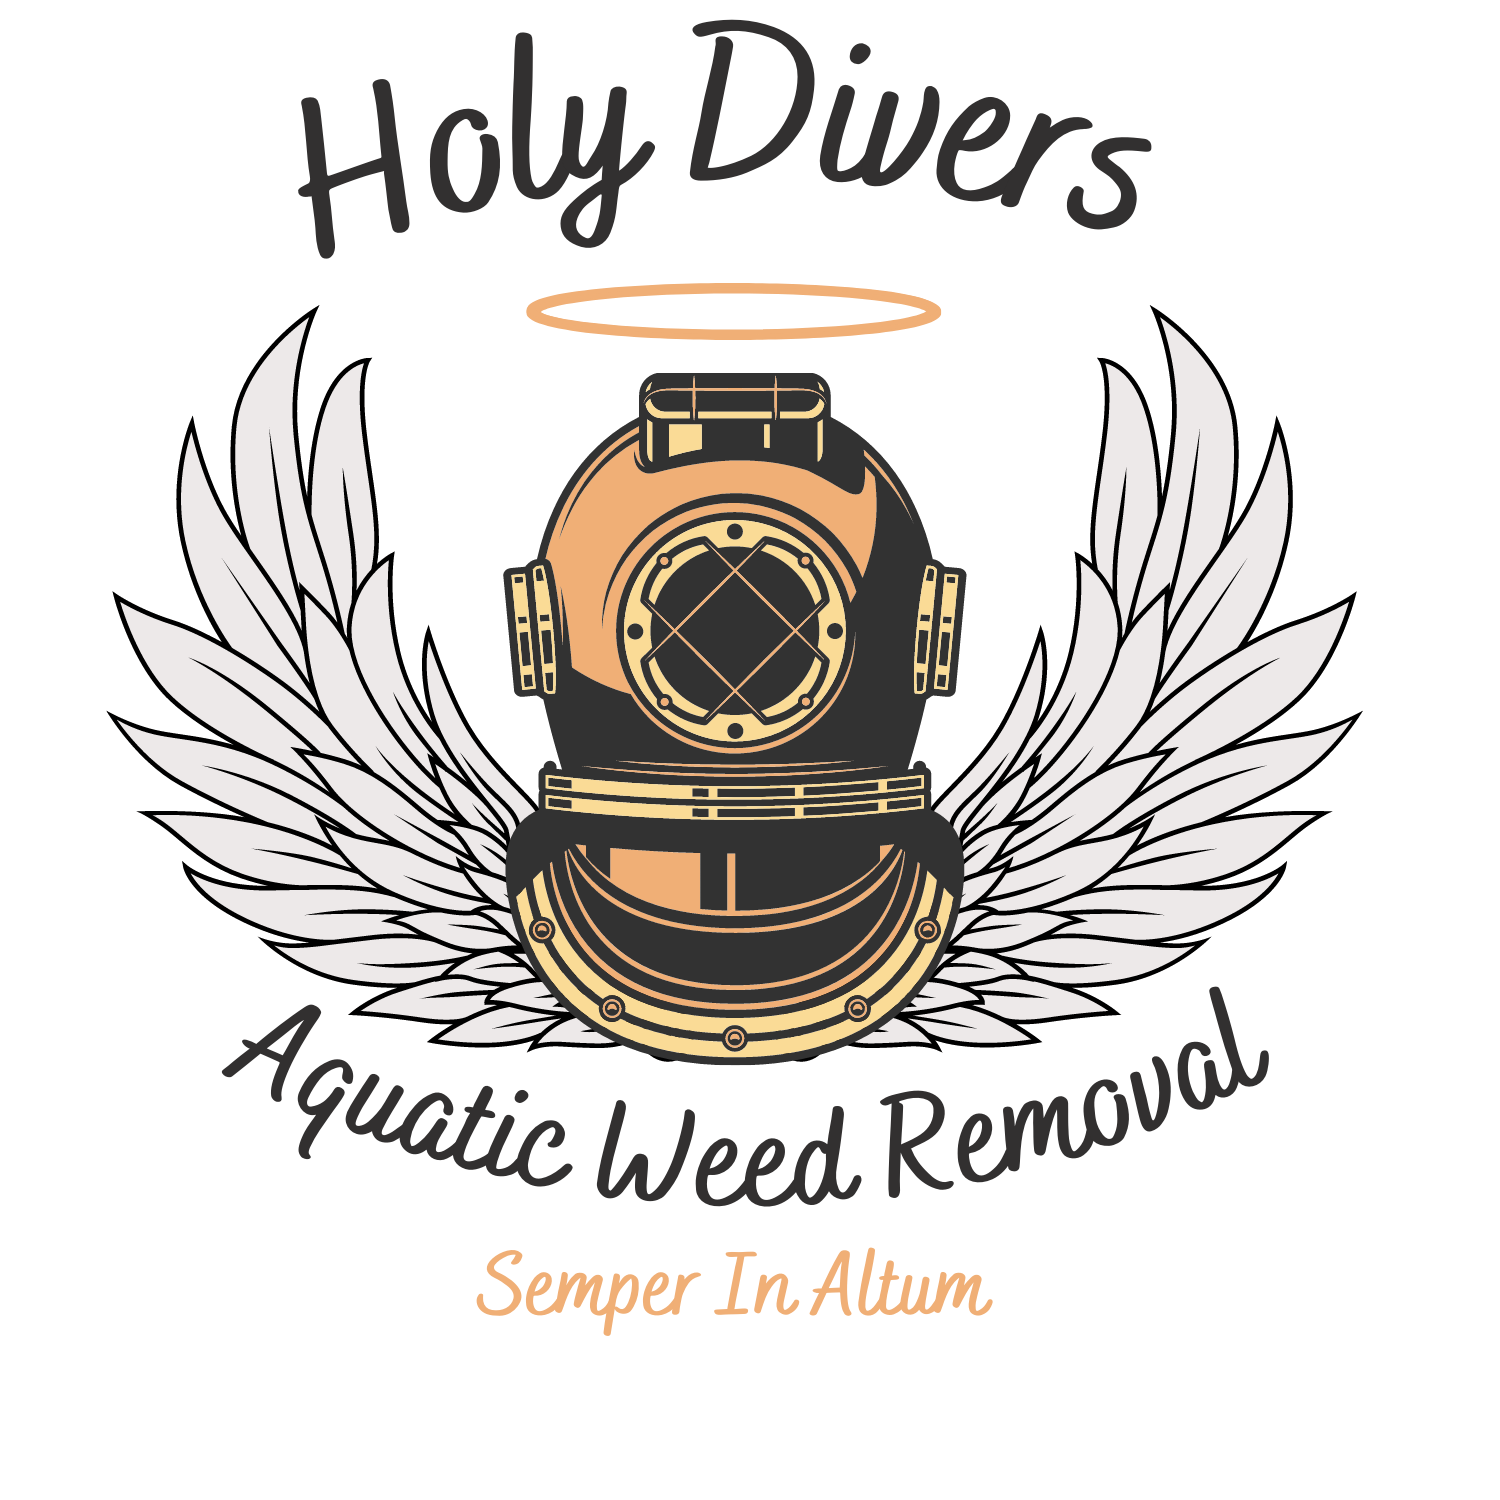 Holy Divers Aquatic Weed Removal